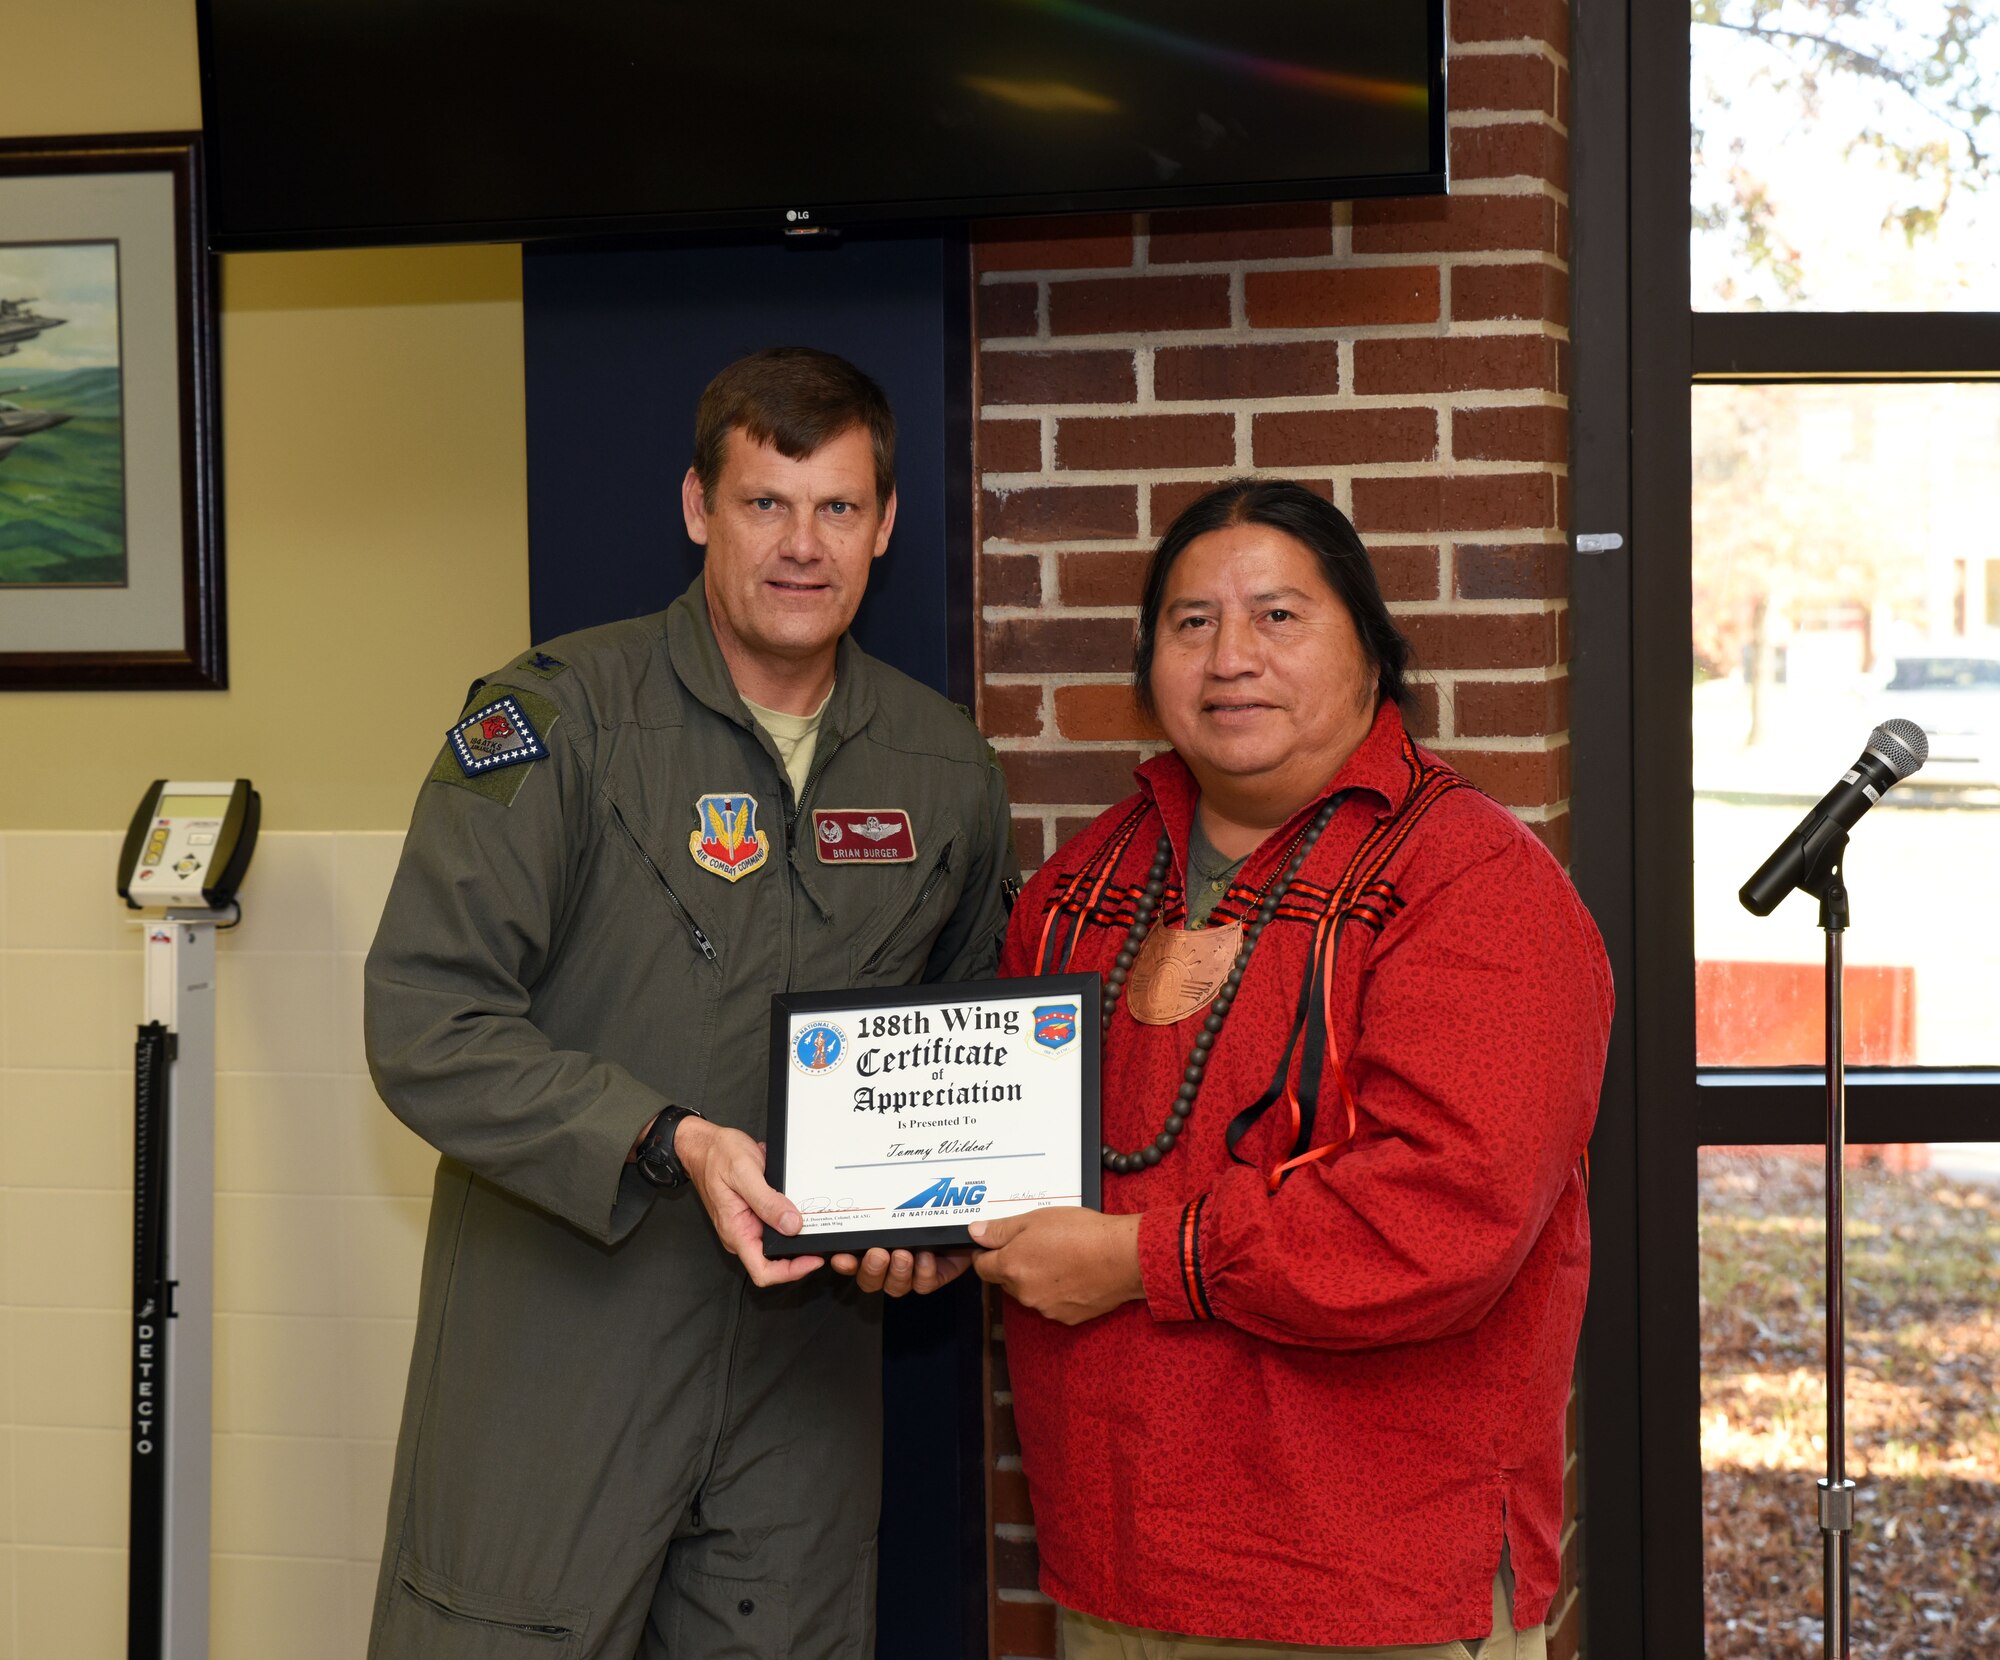 Tommy Wildcat, supervisor of the Ancient Village living history exhibit and accomplished Cherokee recording artist, receives a certificate of appreciation from Col. Brian Burger, 188th Operations Group commander, at Ebbing Air National Guard Base, Fort Smith, Ark., for his participation in the 188th Wing’s Native American Indian Heritage Month celebration Nov. 18, 2015. Wildcat has been featured in soundtracks that range from Discovery Channel’s “How the West was Lost” to Turner Network Television’s movie “Tecumseh, the Last Warrior.” (U.S. Air National Guard photo by Senior Airman Cody Martin/Released)